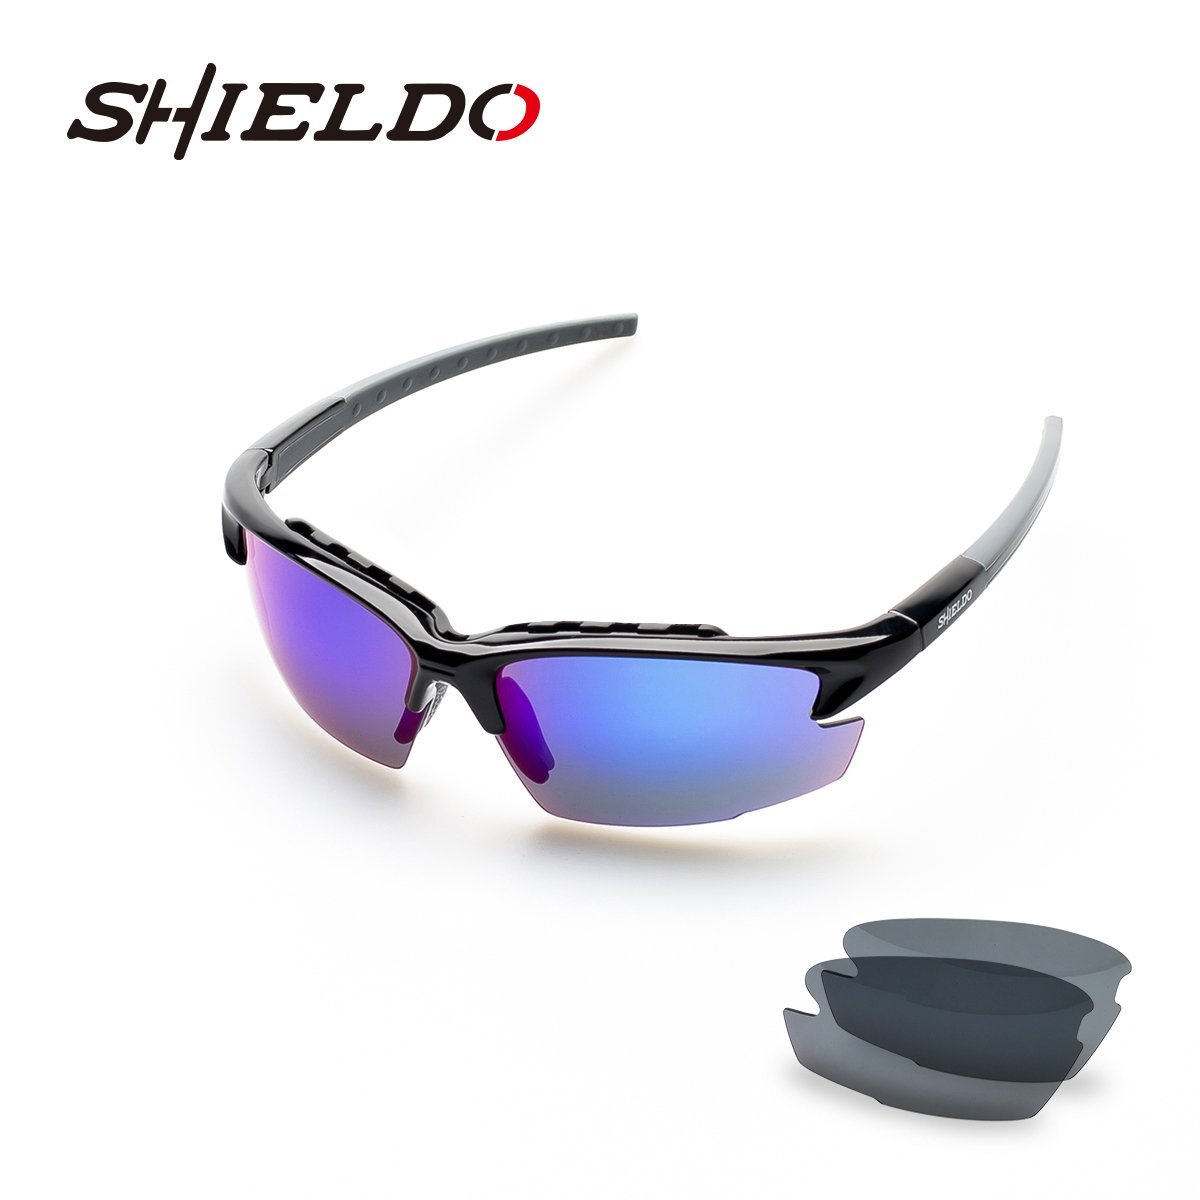 Sports Sunglasses for Baseball Golf and More